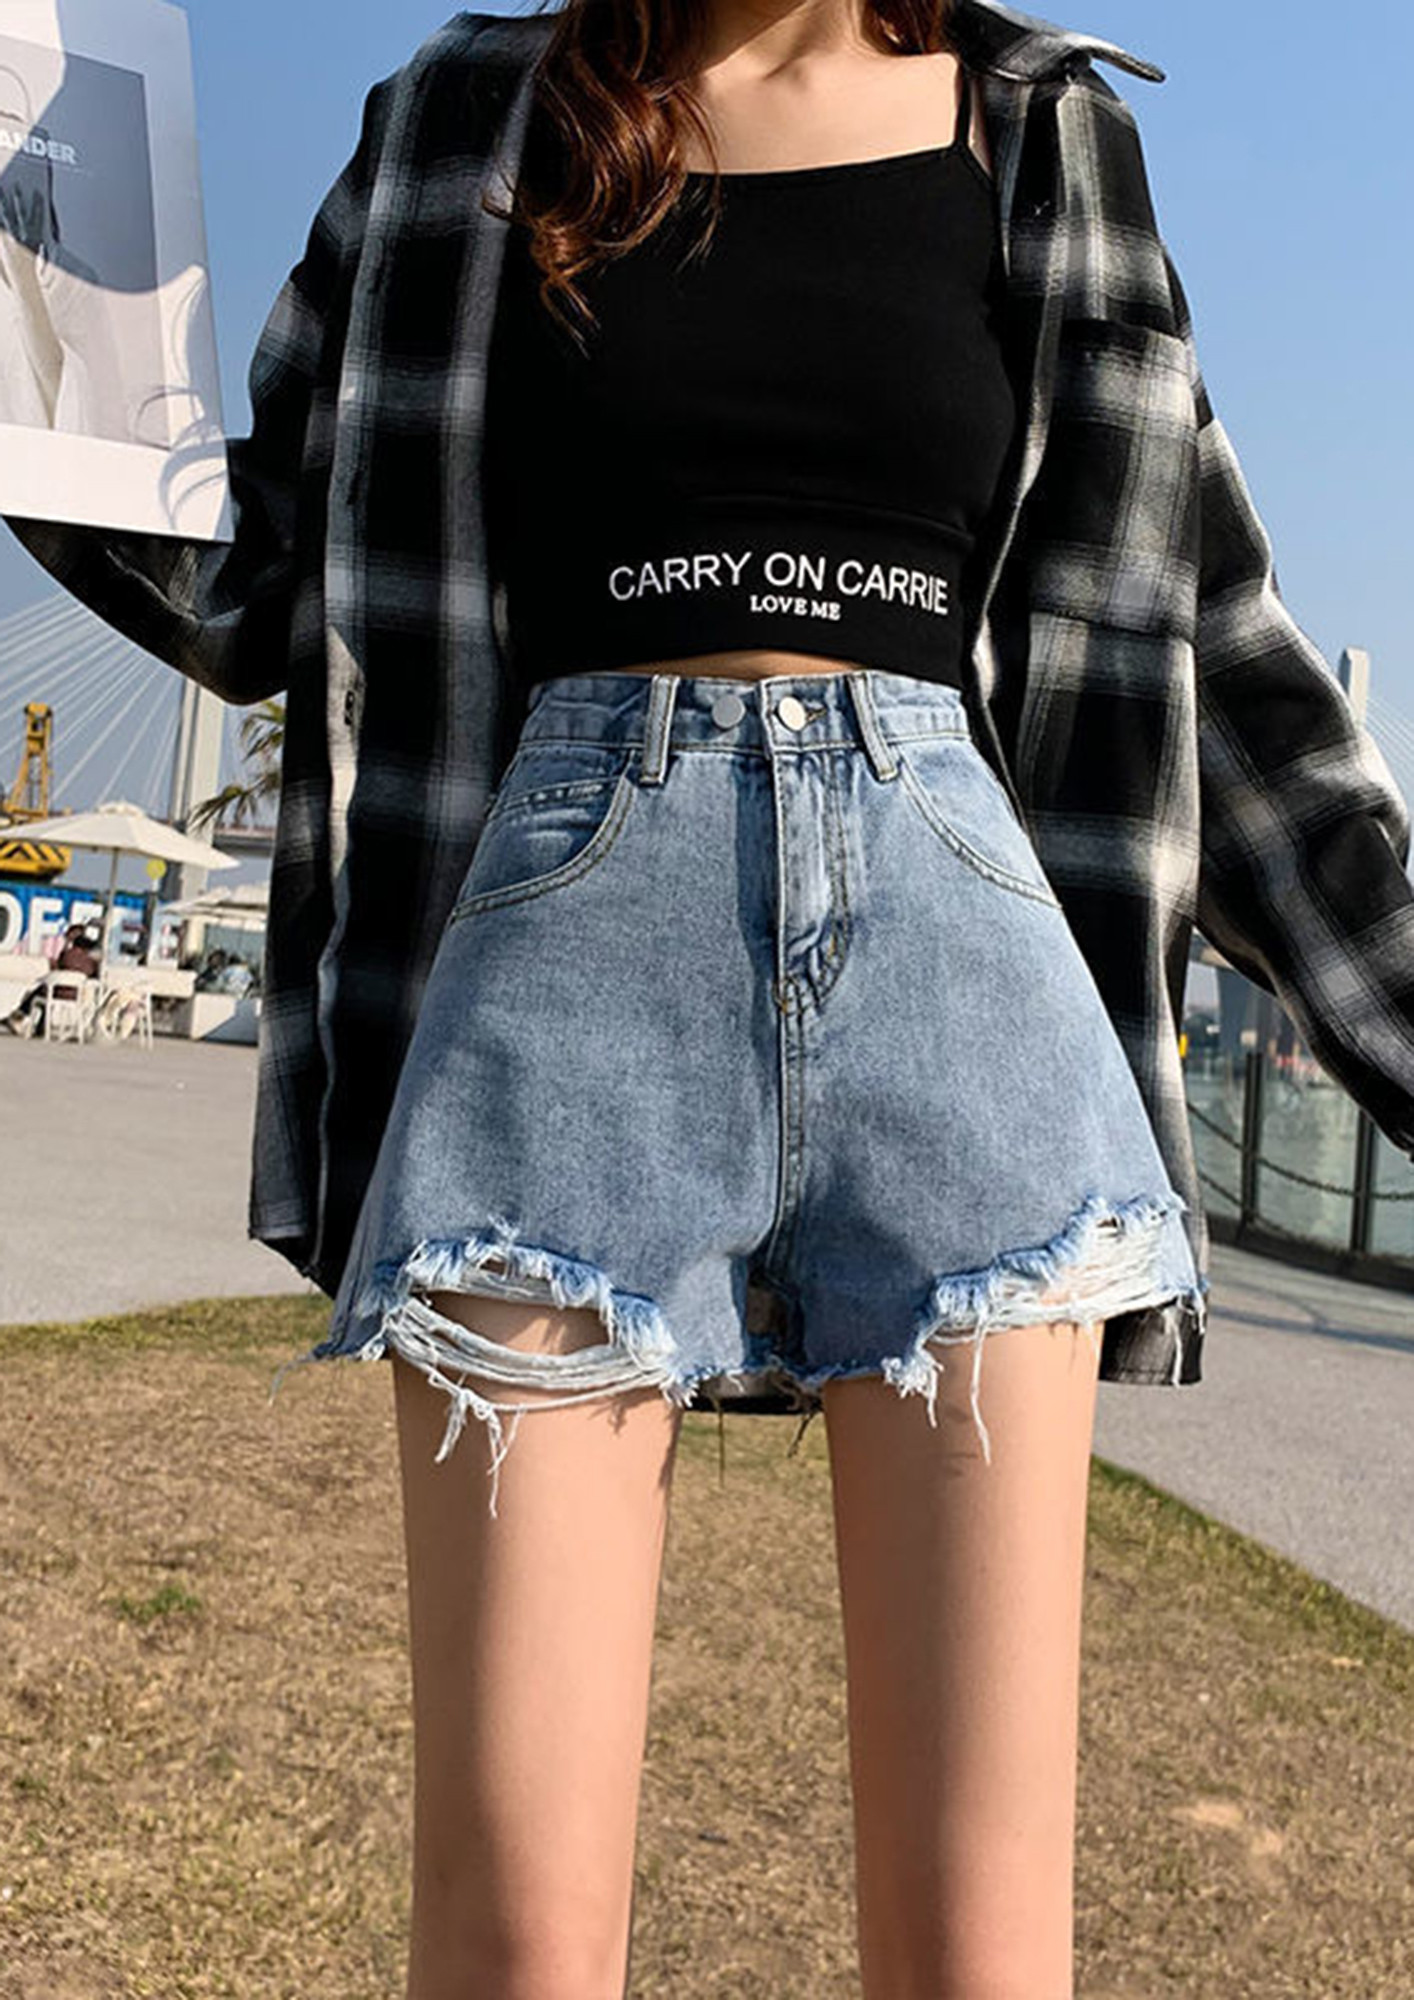 TheList: The Almighty Jean Short - The Best Denim Shorts Inspo